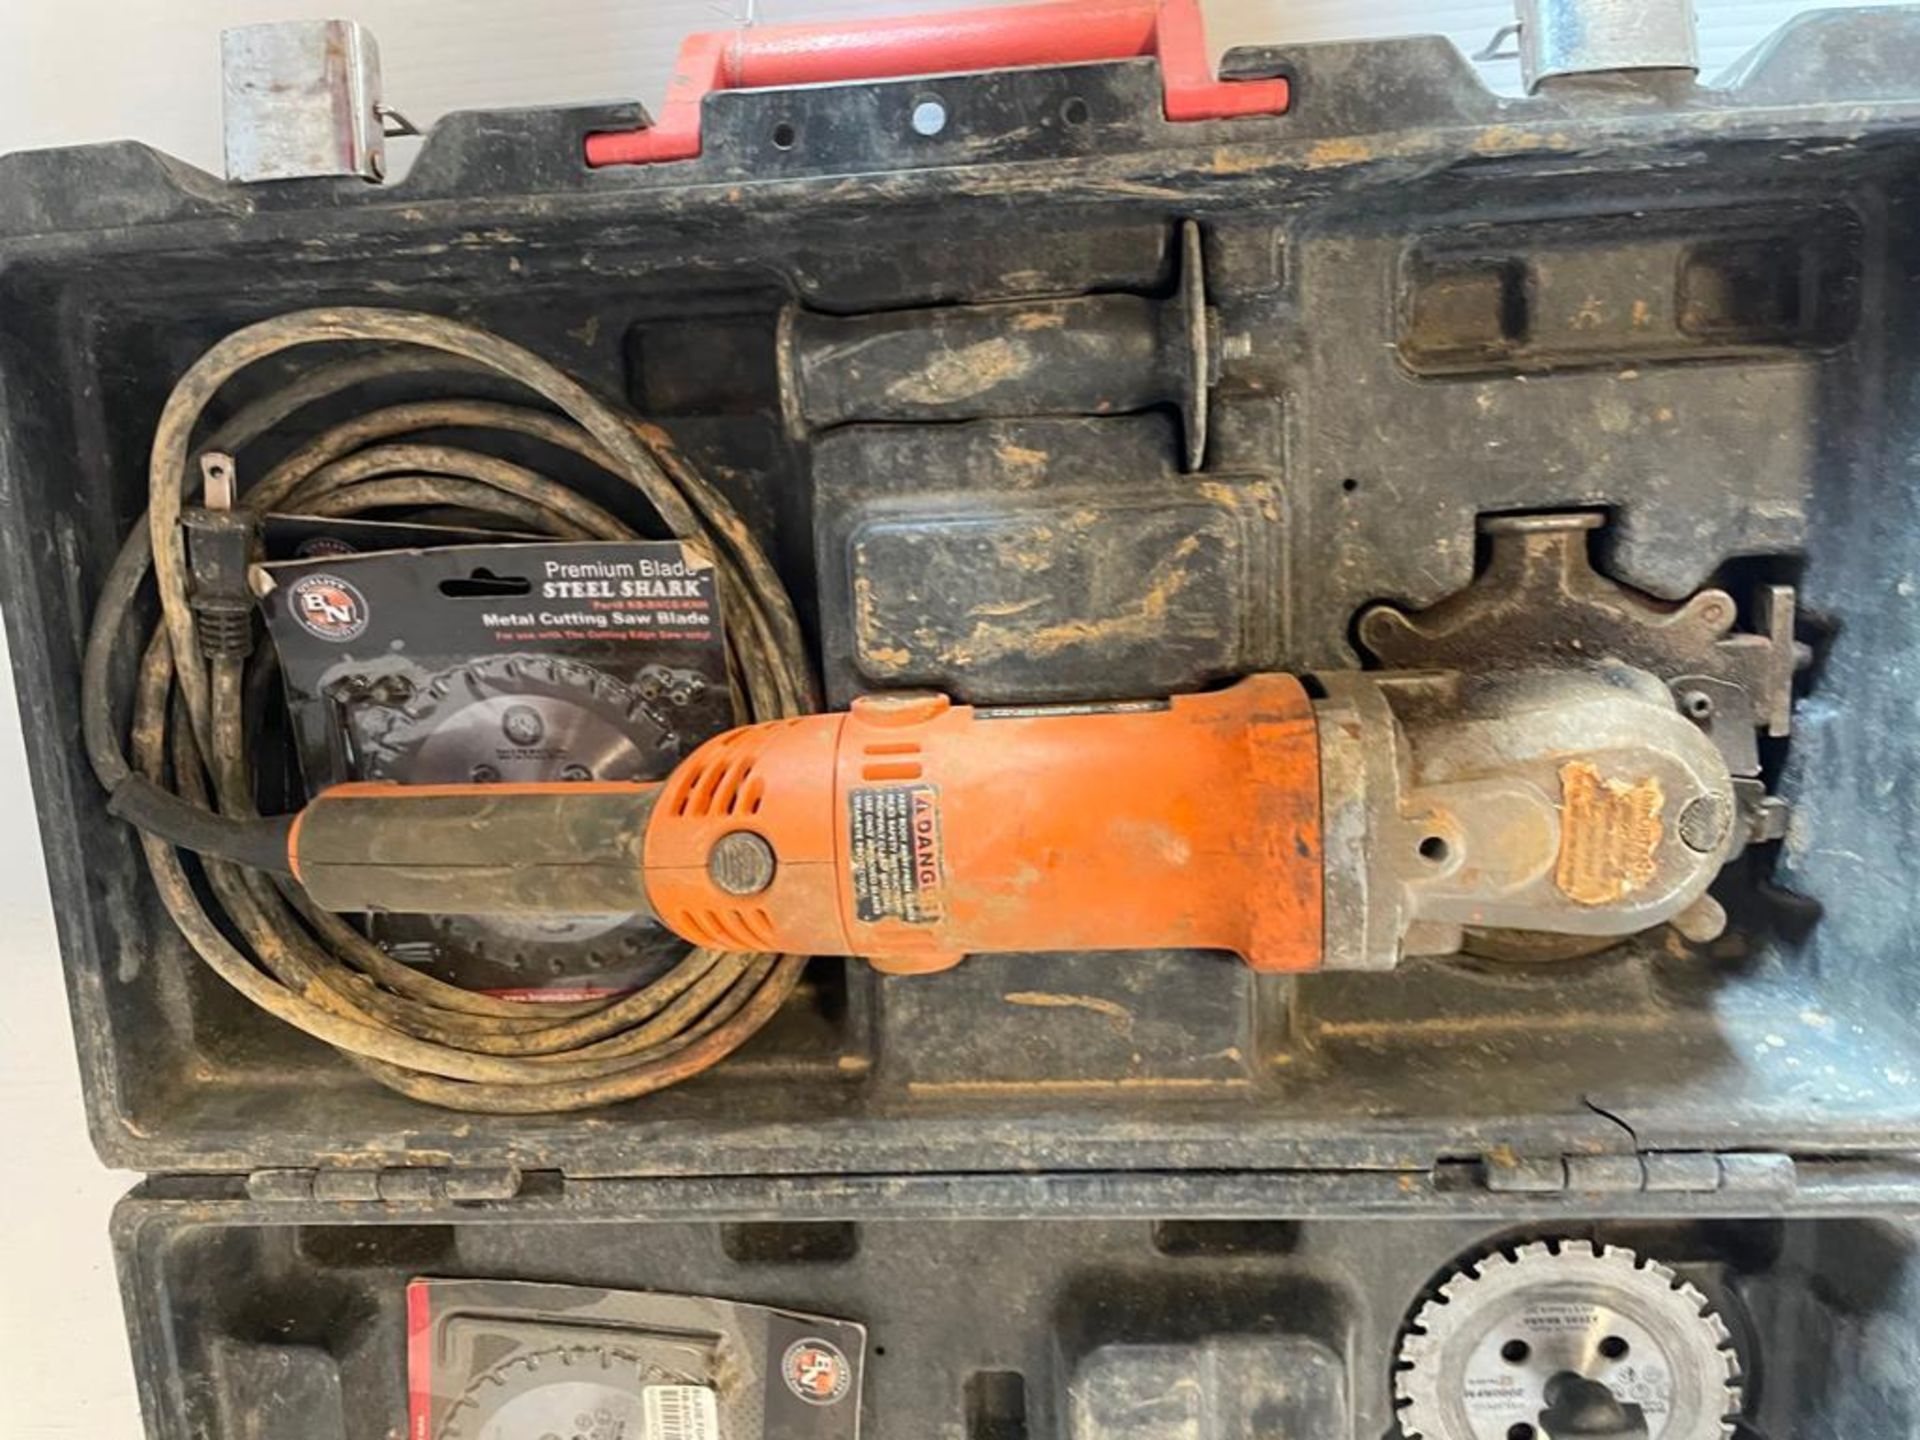 BN BNCE-20 Rotary Rebar Cutting Saw, Serial #1504 0025 E1. 120V in Case. Located in Hazelwood, MO - Image 4 of 6